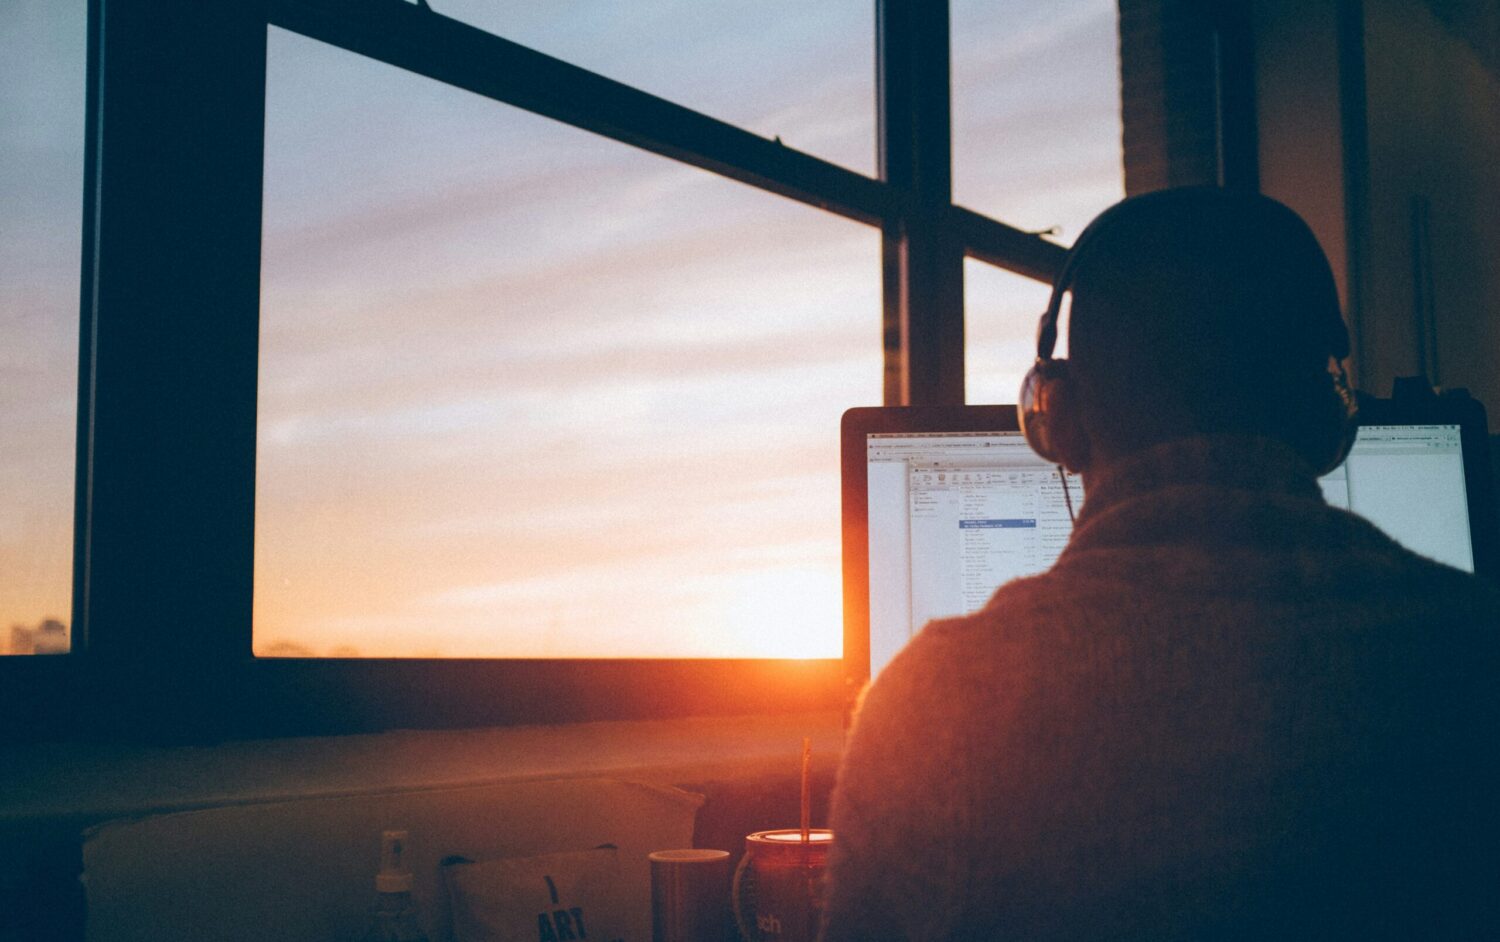 Person wearing headphones facing a computer monitor in front of a window showing setting sun